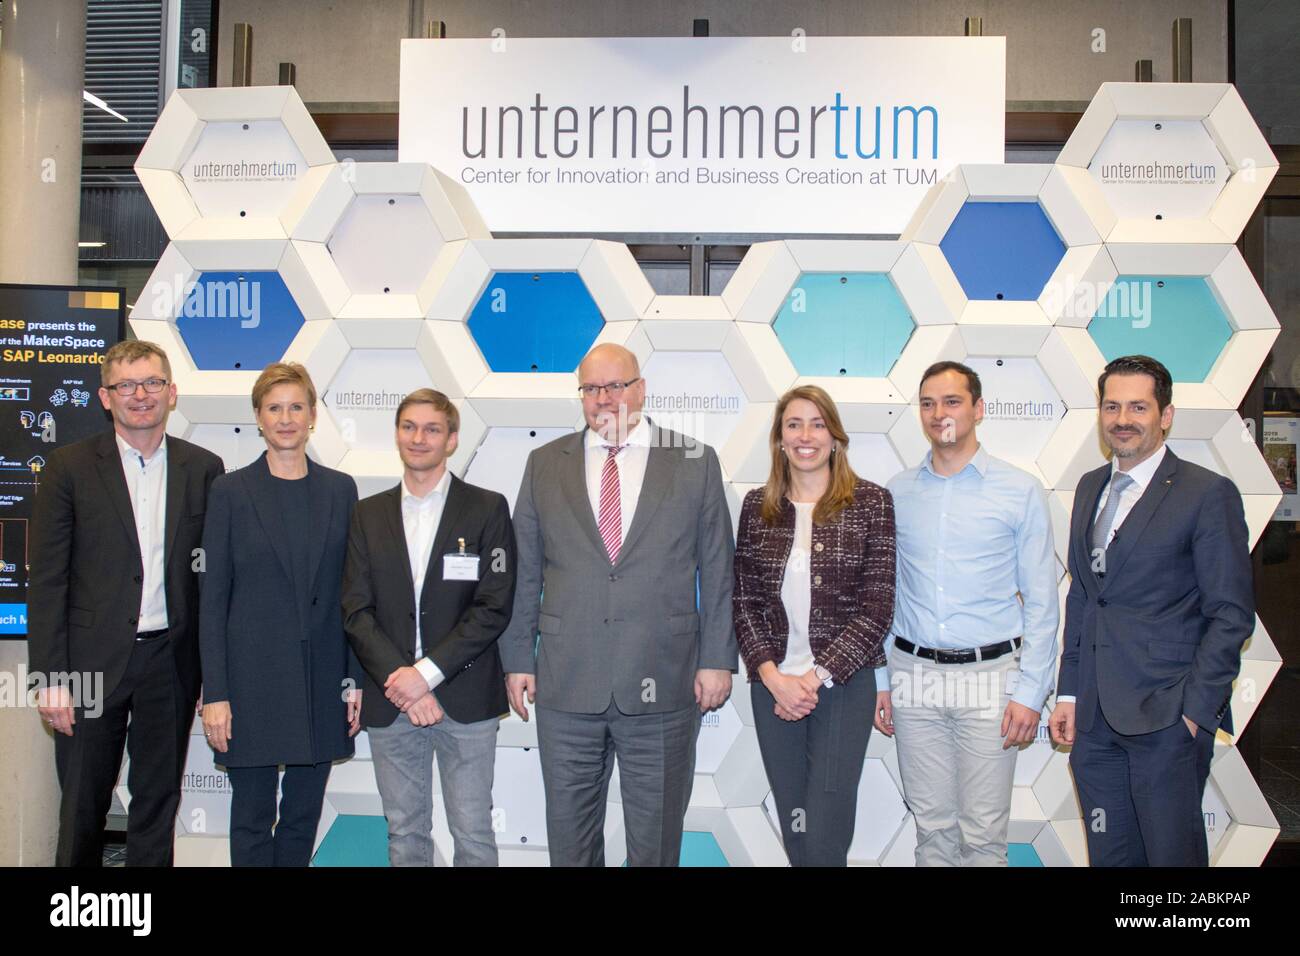 Minister of Economics Peter Altmaier meets Tech Start-Ups at TU Garching at UnternehmerTUM. On the picture from left to right: Dr. Schönenberger (CEO at UnternehmerTUM, Susanne Klatten (entrepreneur), Alexander Regnat (physicist at TUM), Peter Altmiaer, Miriam Haerst (Chair of Medical Technology at TUM), Adam Probst (founder and CEO of maiot) and Prof. Dr. Thomas Hofmann (food chemist at TUM) [automated translation] Stock Photo